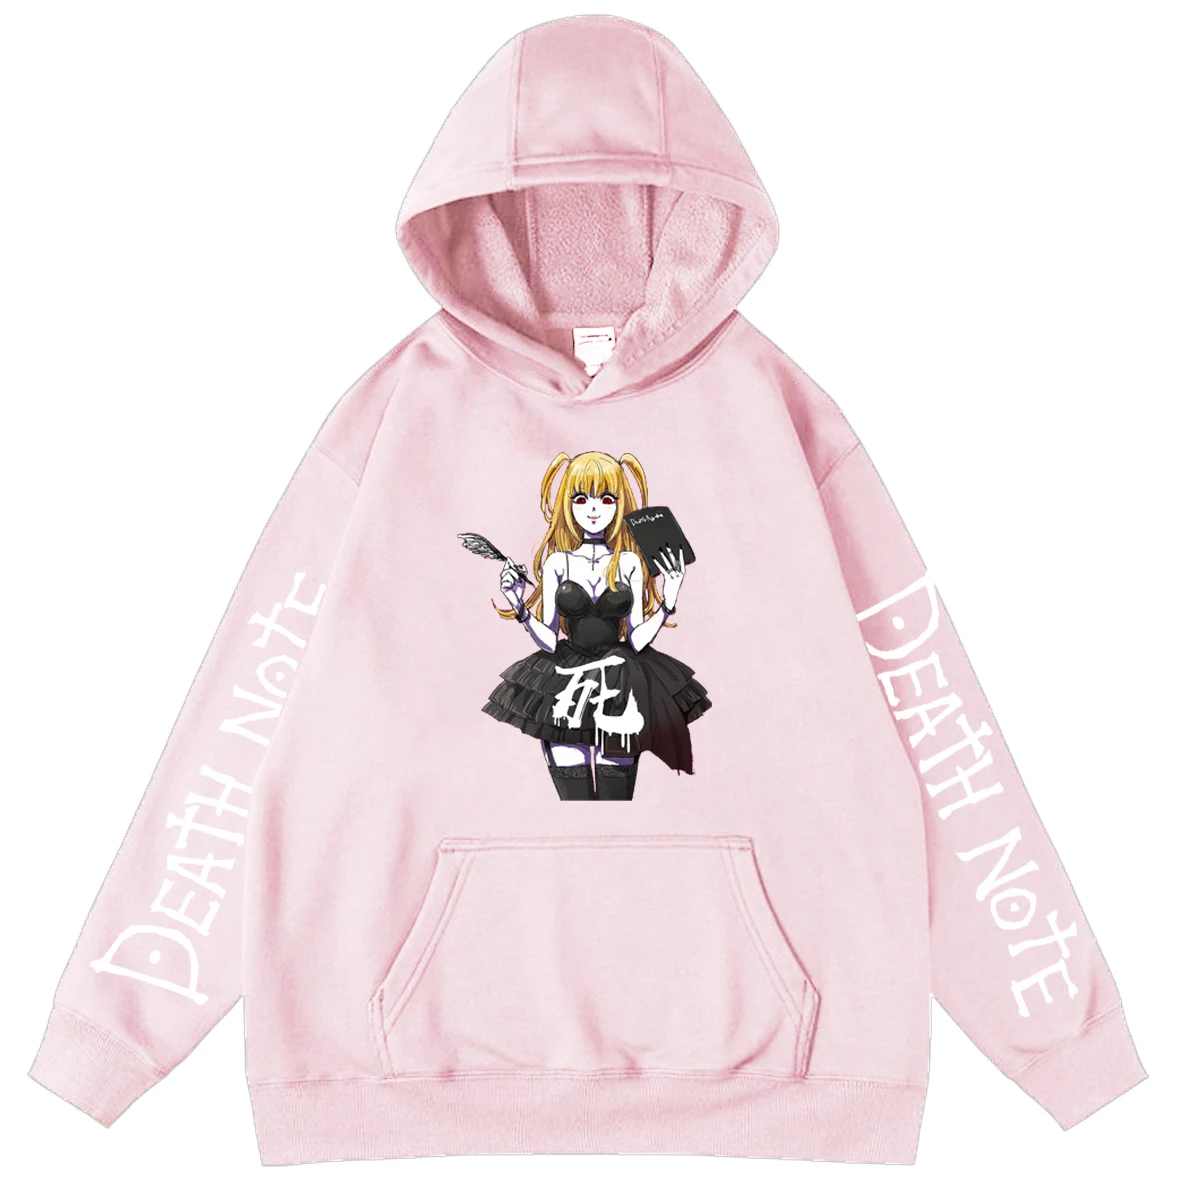 

Death Note Parent-child Children's Clothing Sweatshirt Cartoon Anime Outfit Child Hoodies Casual Girls/boys' Oversized Hoodie